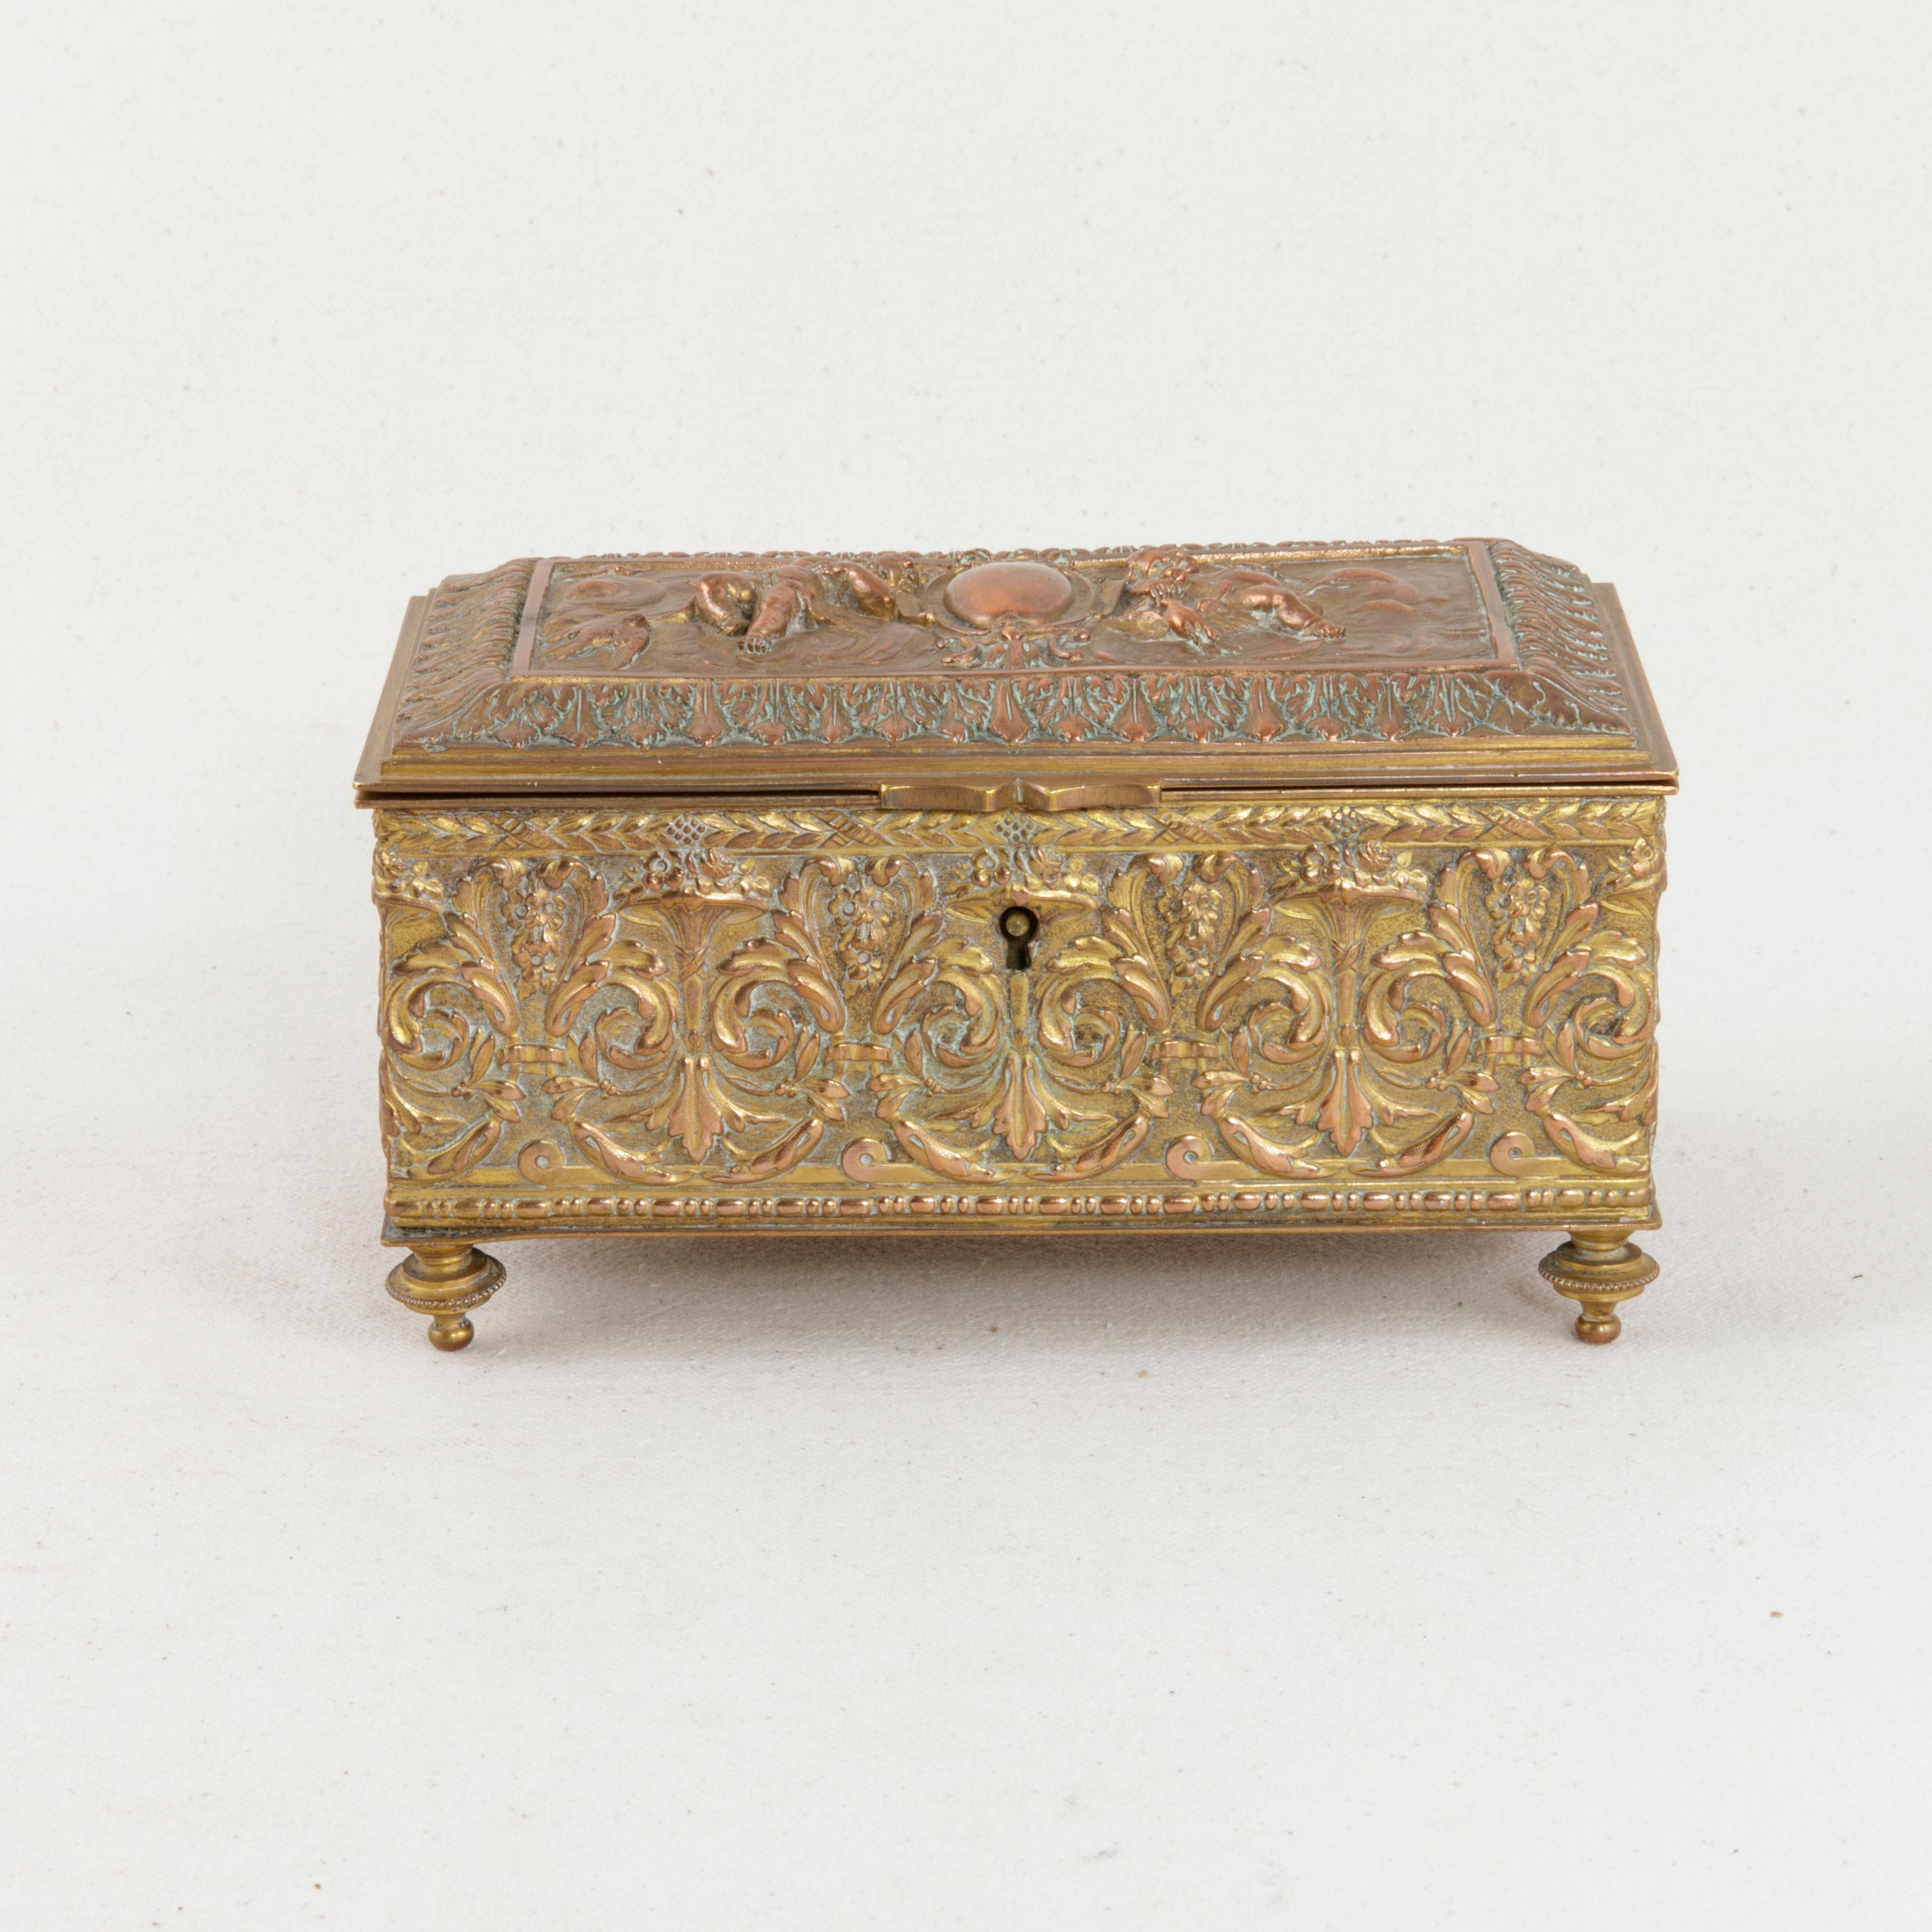 French Copper Repousse Box with Lid, Cherubs and Floral Motif, circa 1900 (Französisch)